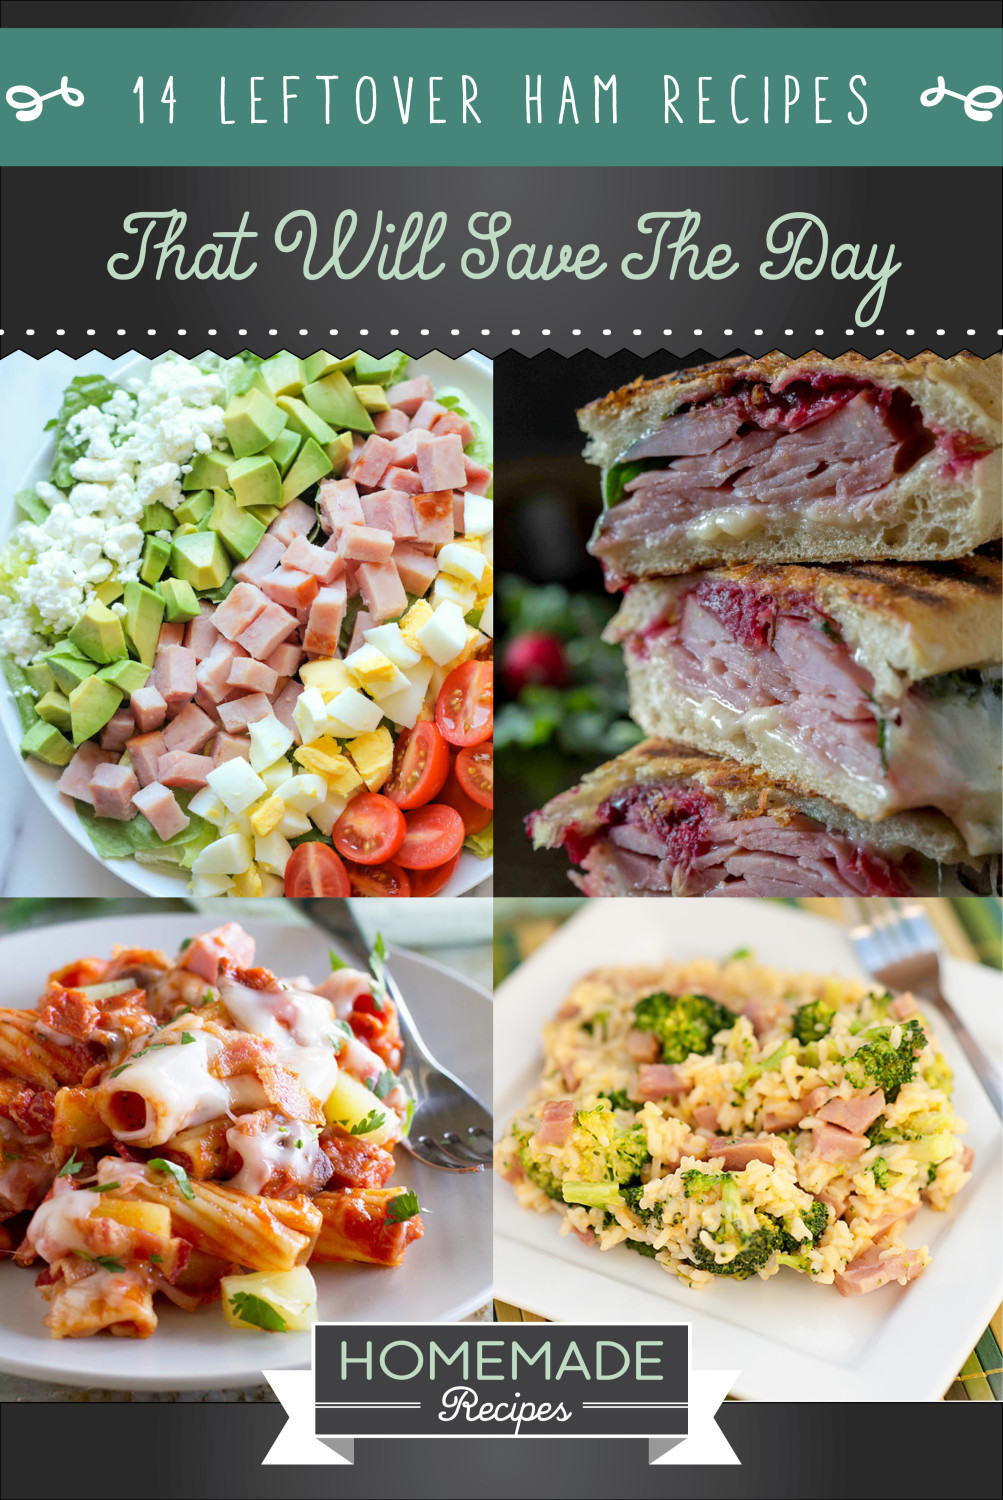 Healthy Leftover Ham Recipes
 14 Leftover Ham Recipes That Will Save The Day